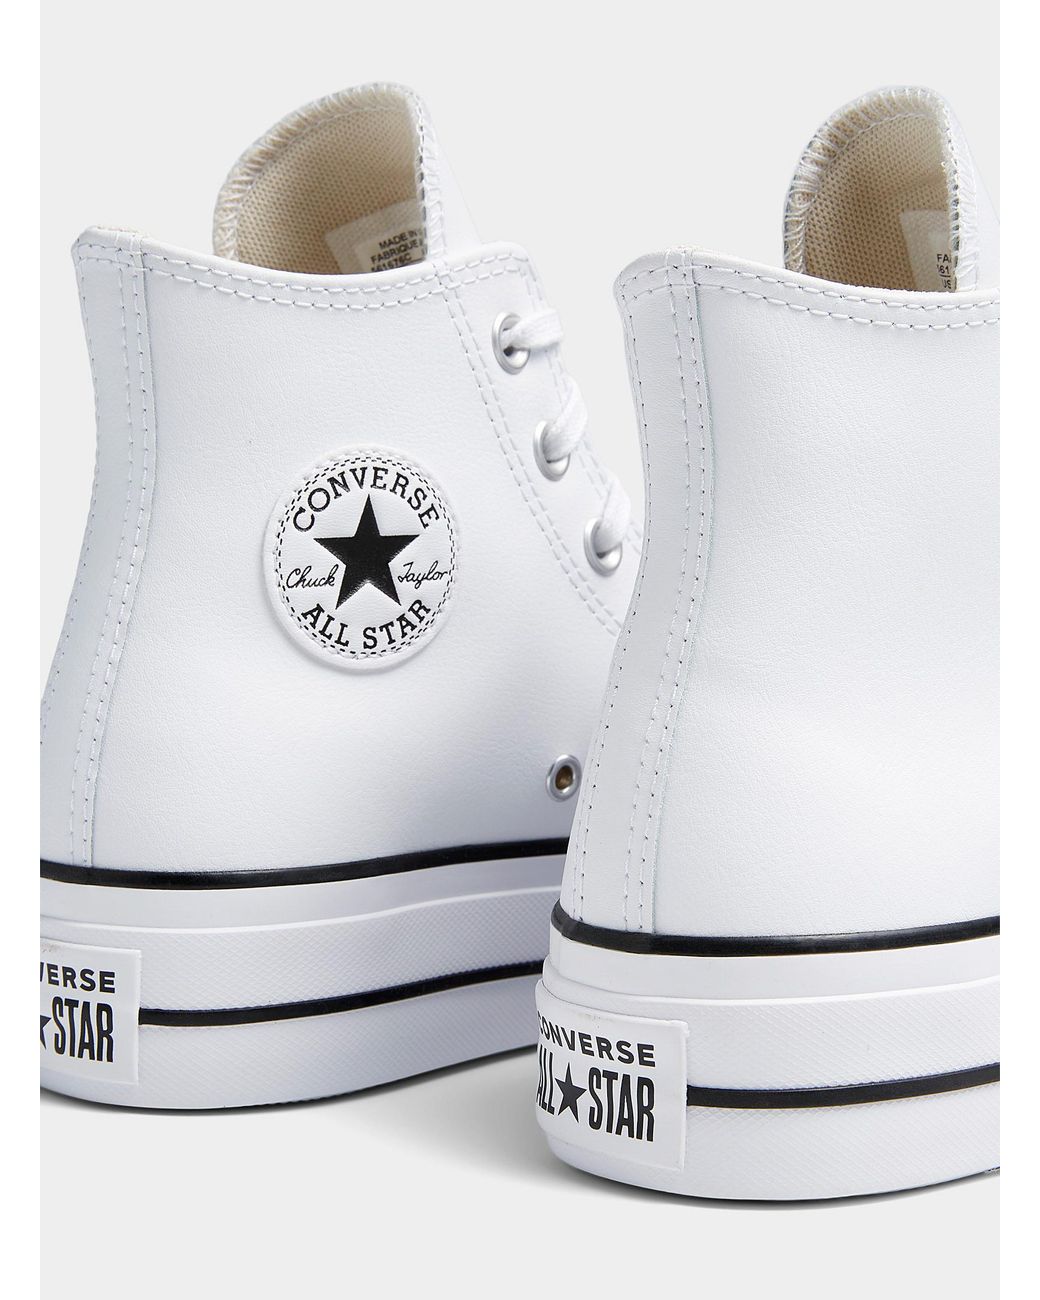 Converse Chuck Taylor All Star High Top White Leather Platform Sneaker  Women | Lyst